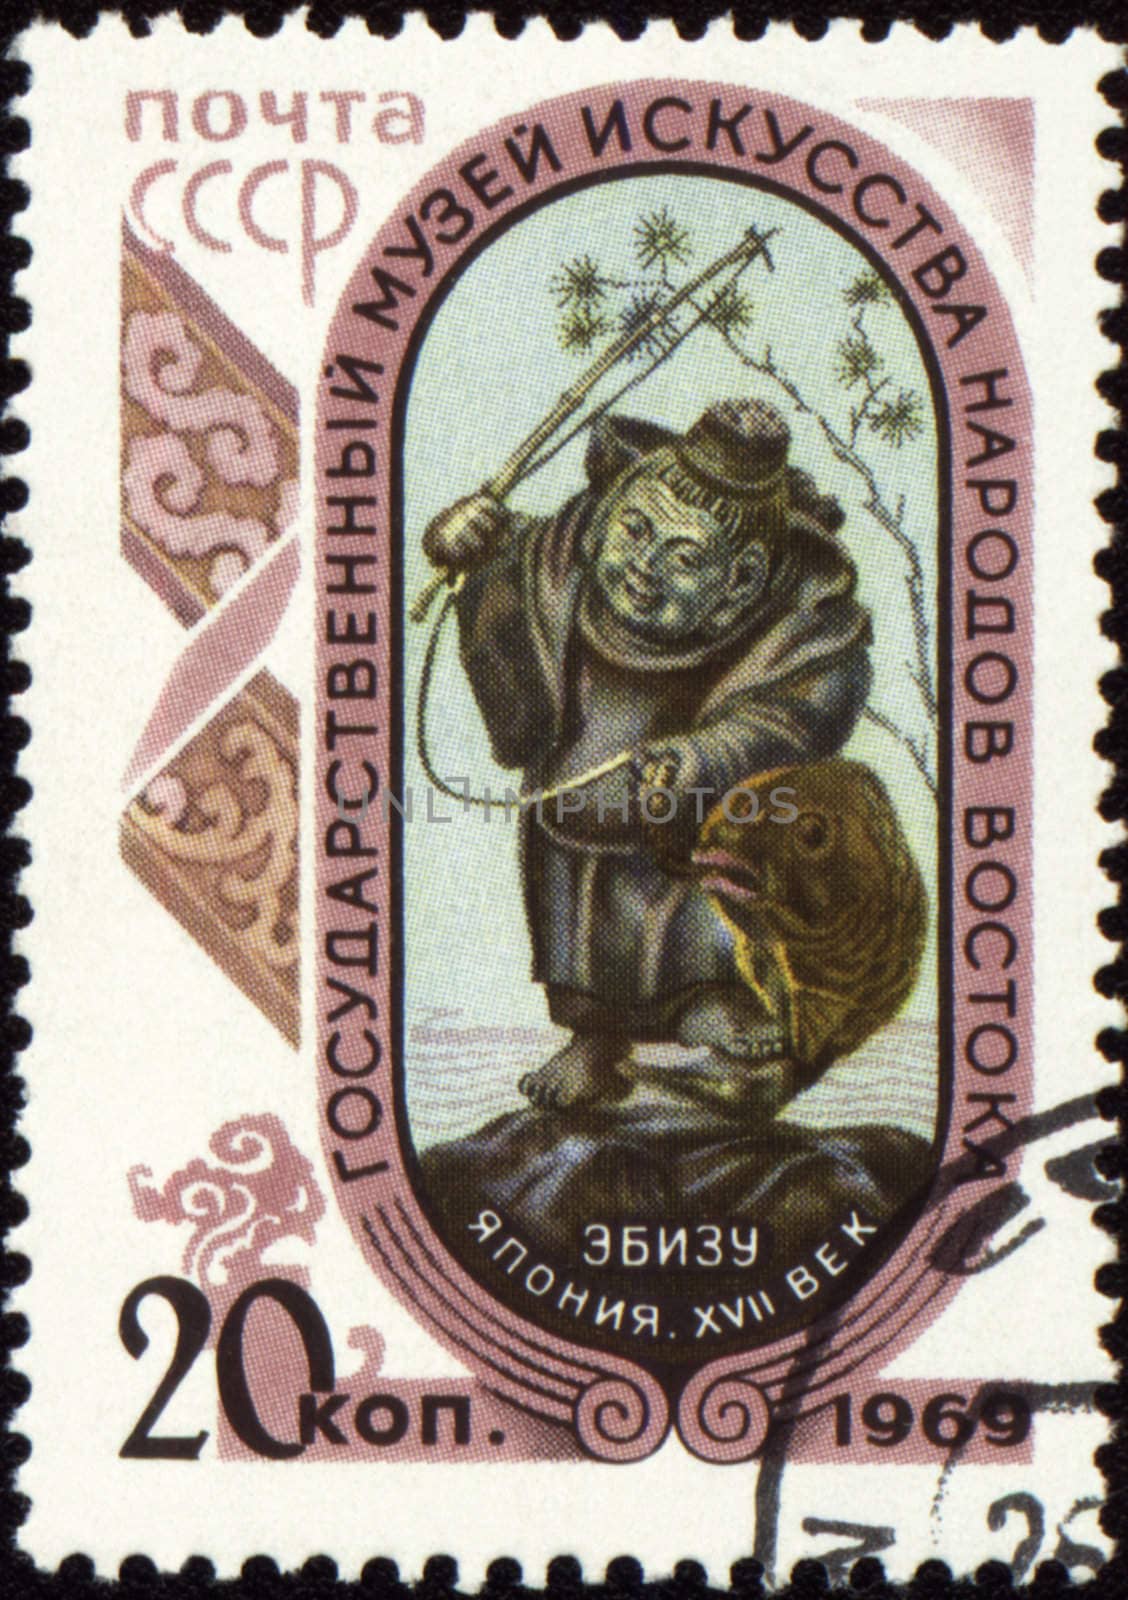 USSR - CIRCA 1969: A stamp printed in the USSR shows sculpture of Ebisu, the Japanese god of fishermen, luck, and workingmen, series Museum of Oriental Art, circa 1969